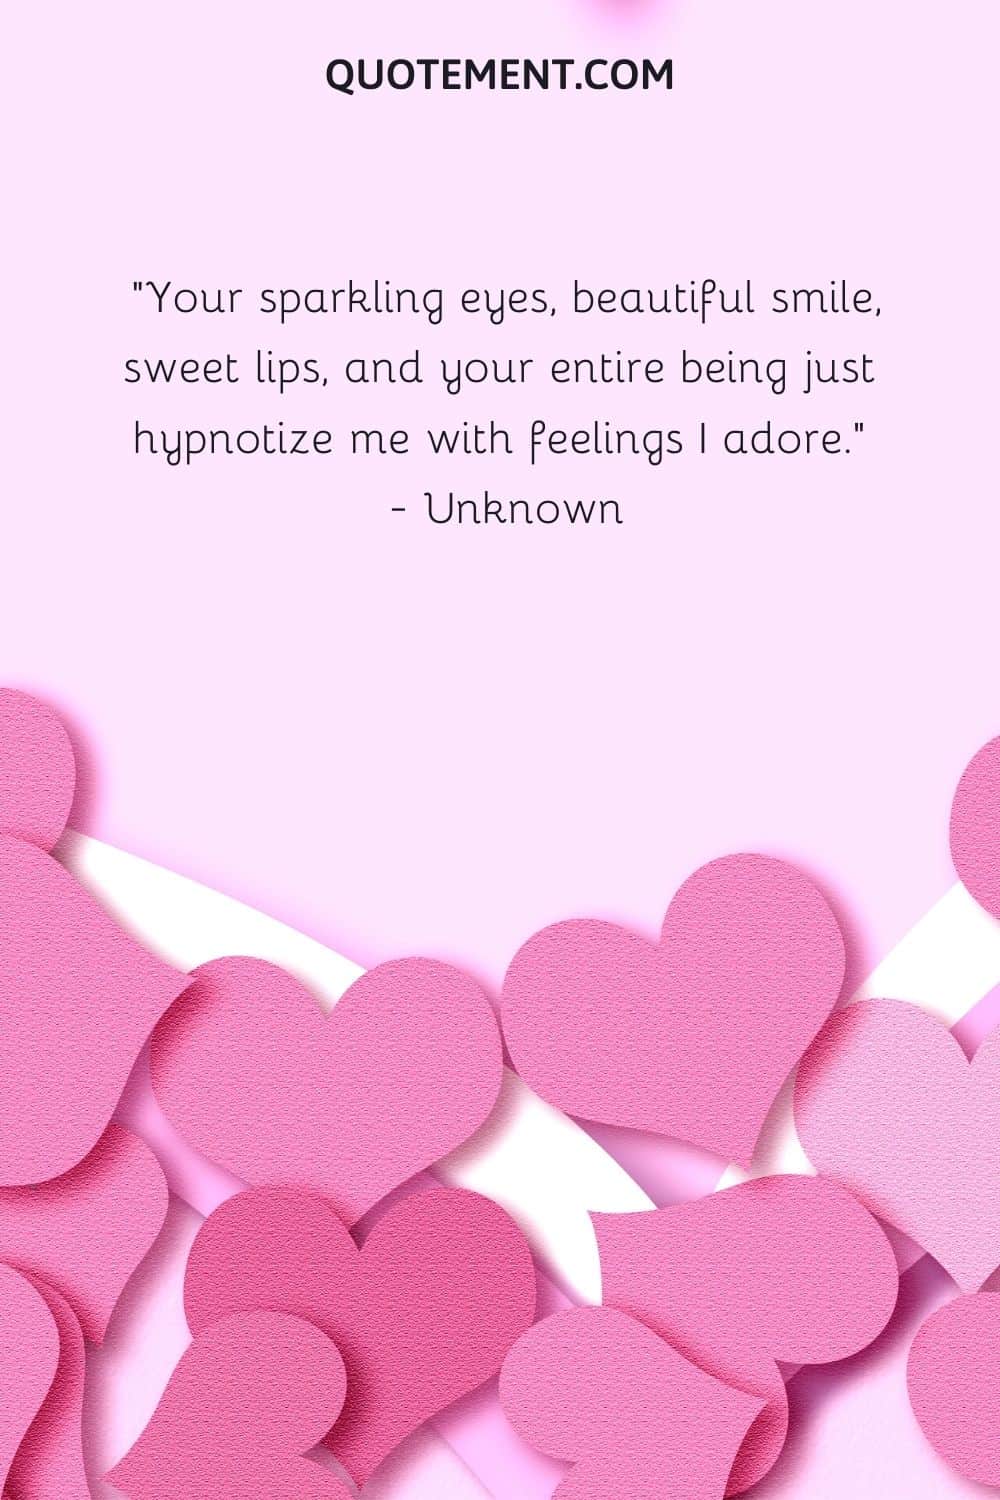 Your sparkling eyes, beautiful smile, sweet lips, and your entire being just hypnotize me with feelings I adore.  — Unknown